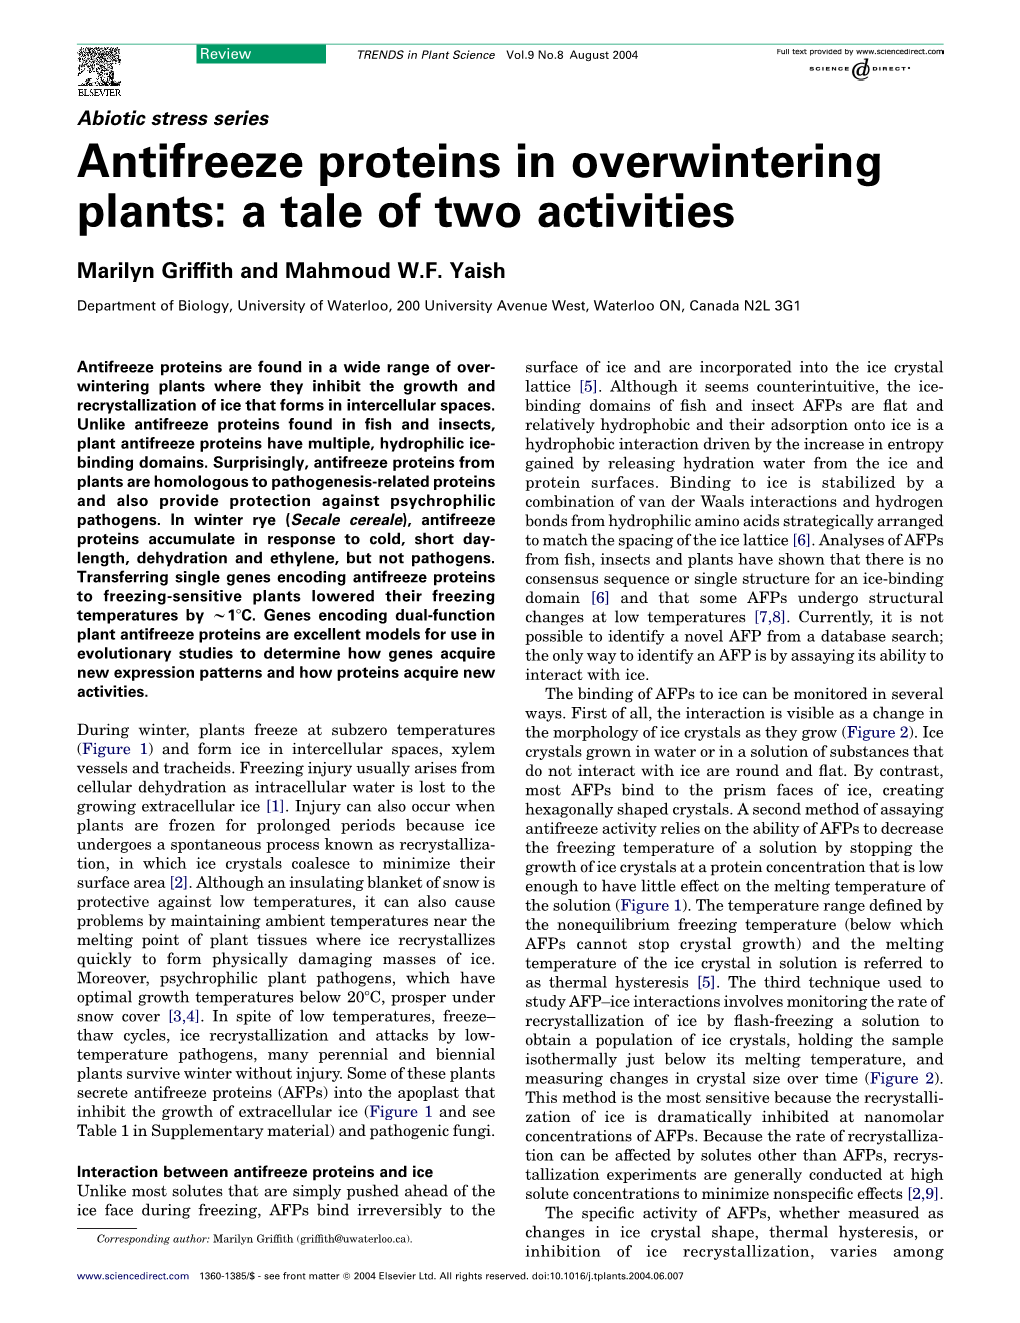 Antifreeze Proteins in Overwintering Plants: a Tale of Two Activities